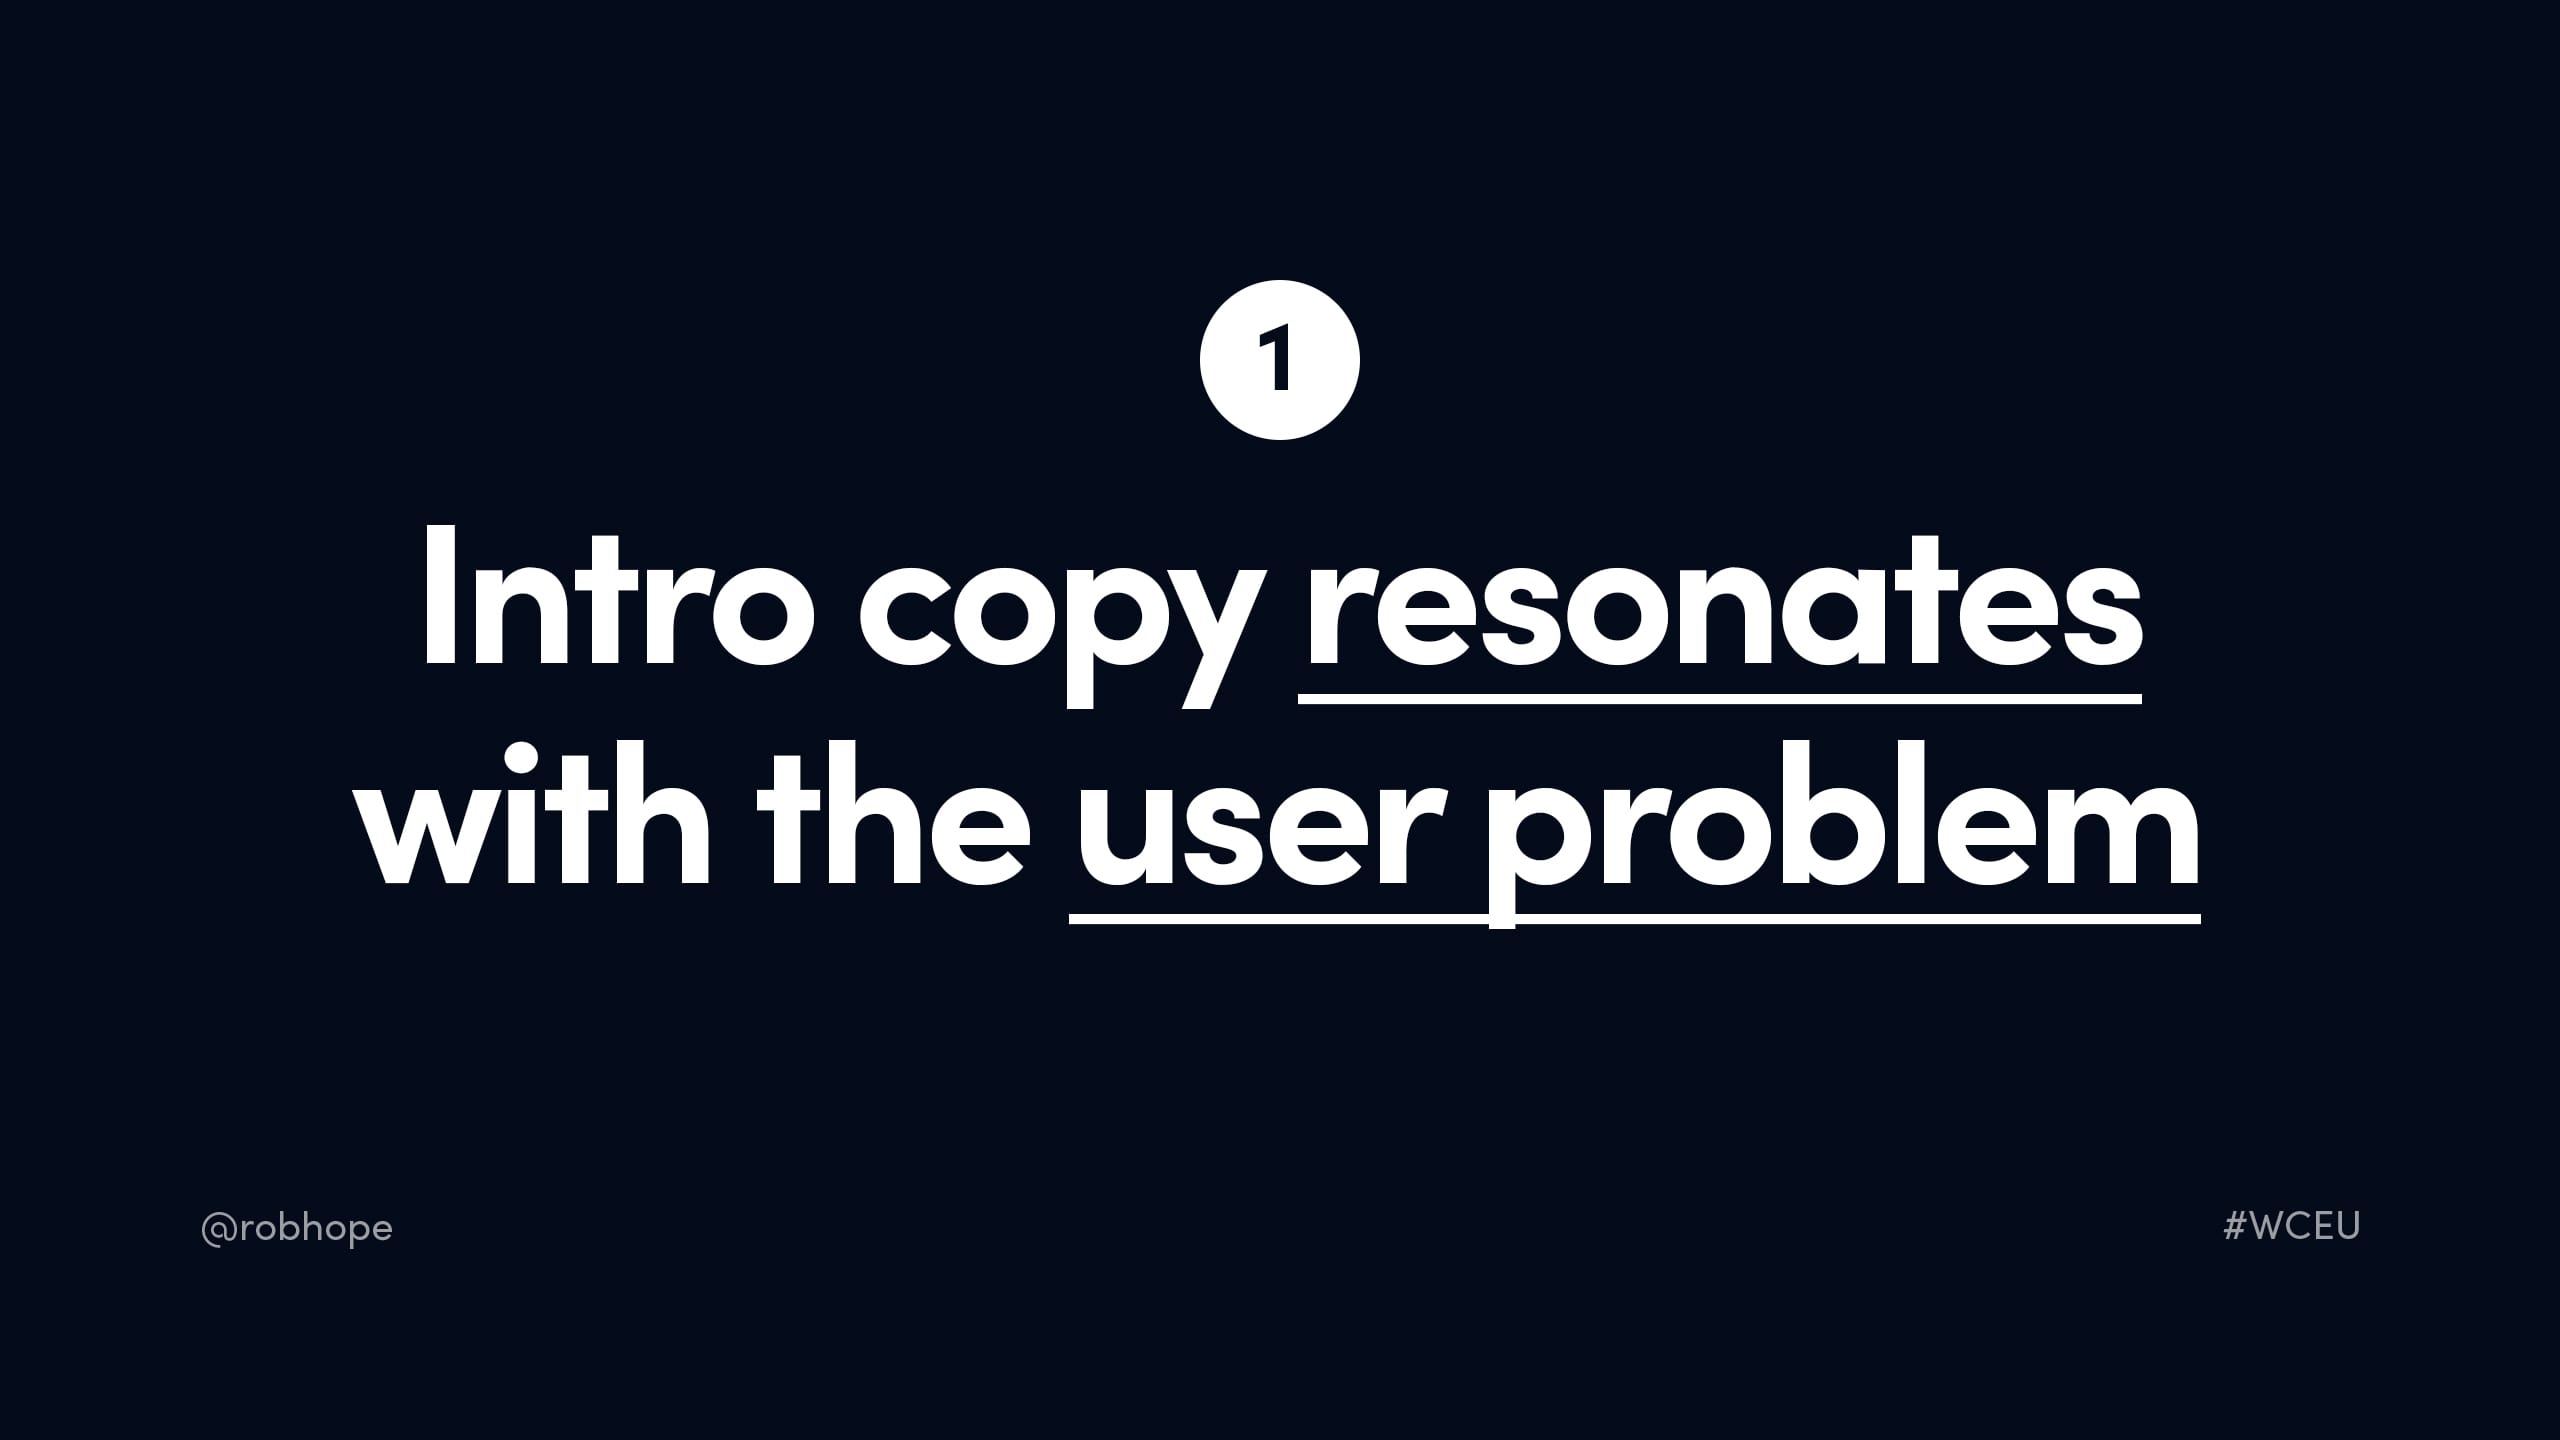 Intro copy must resonate with the user problem